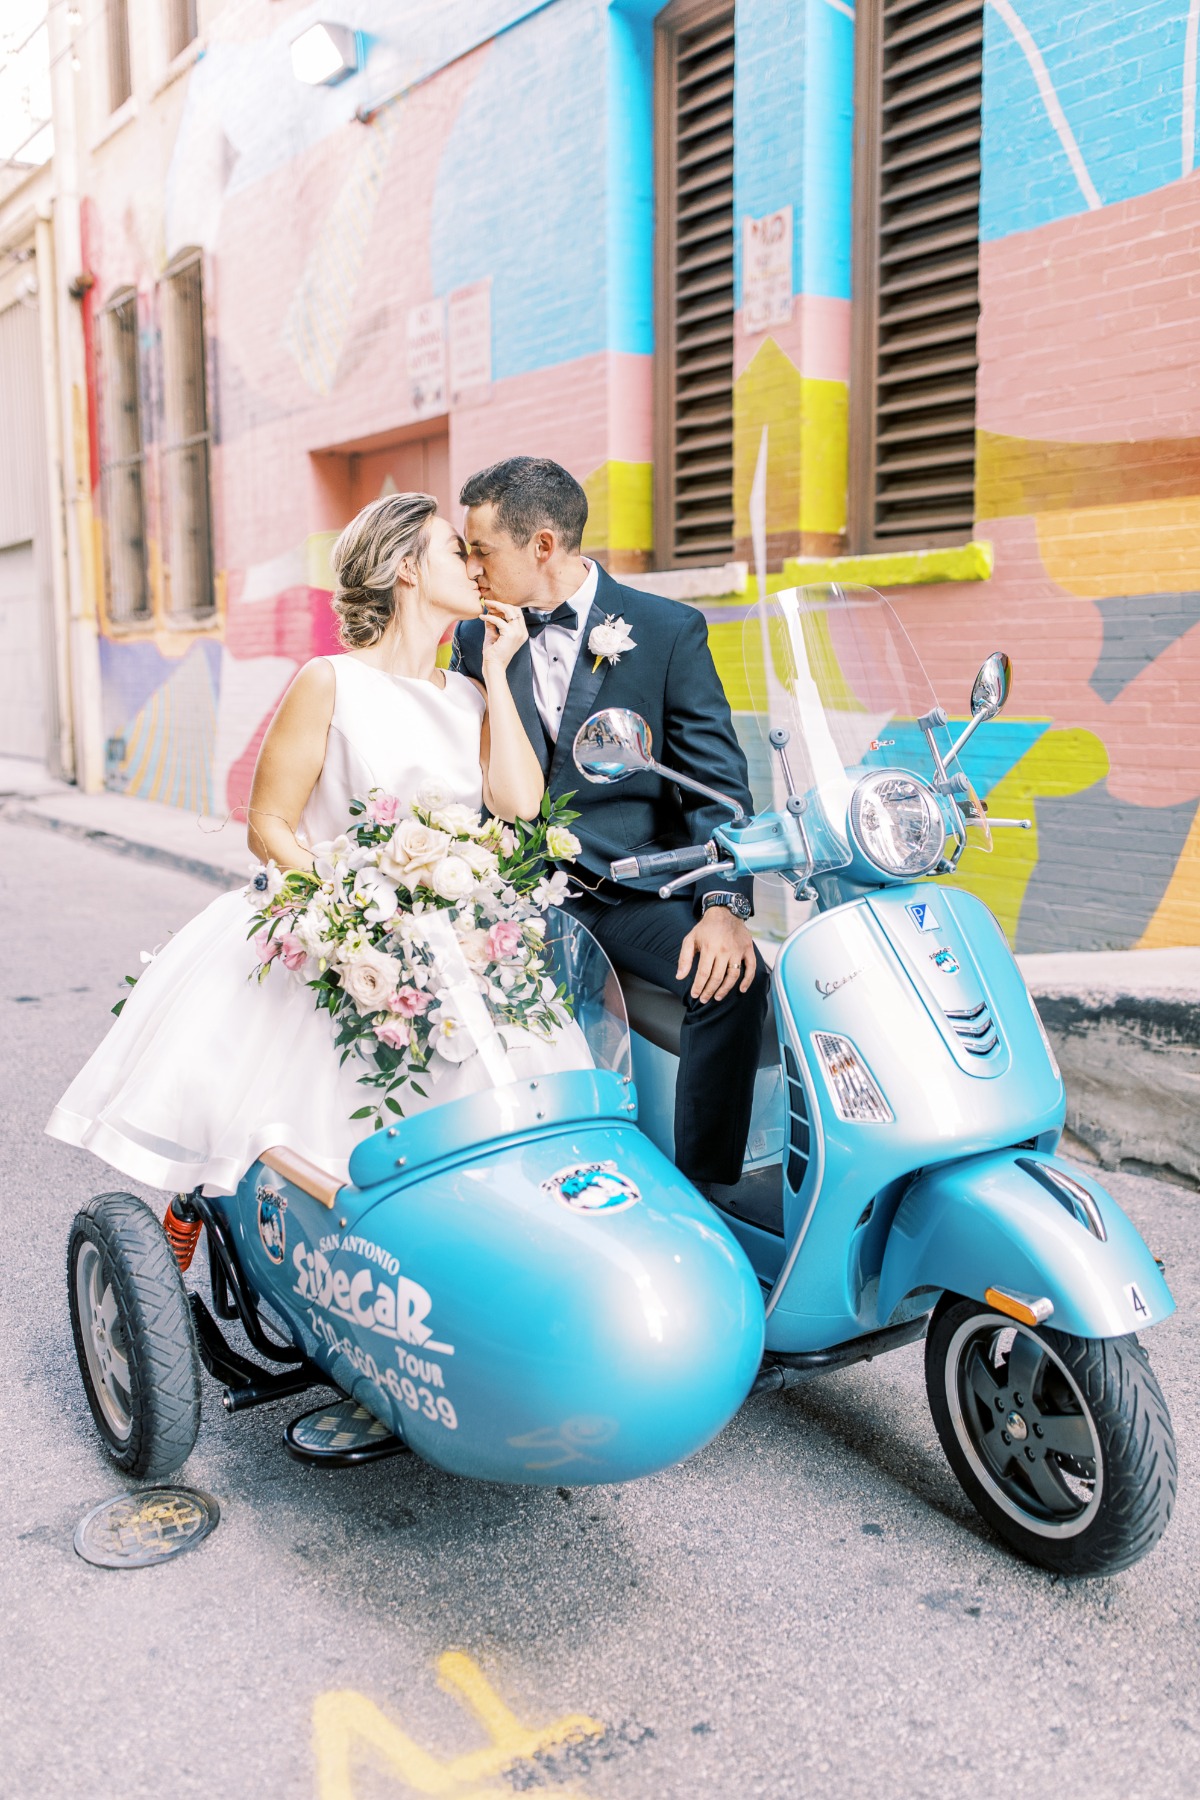 Euro Wedding Inspiration Complete With Italian Vespas and a Whiskey Tower